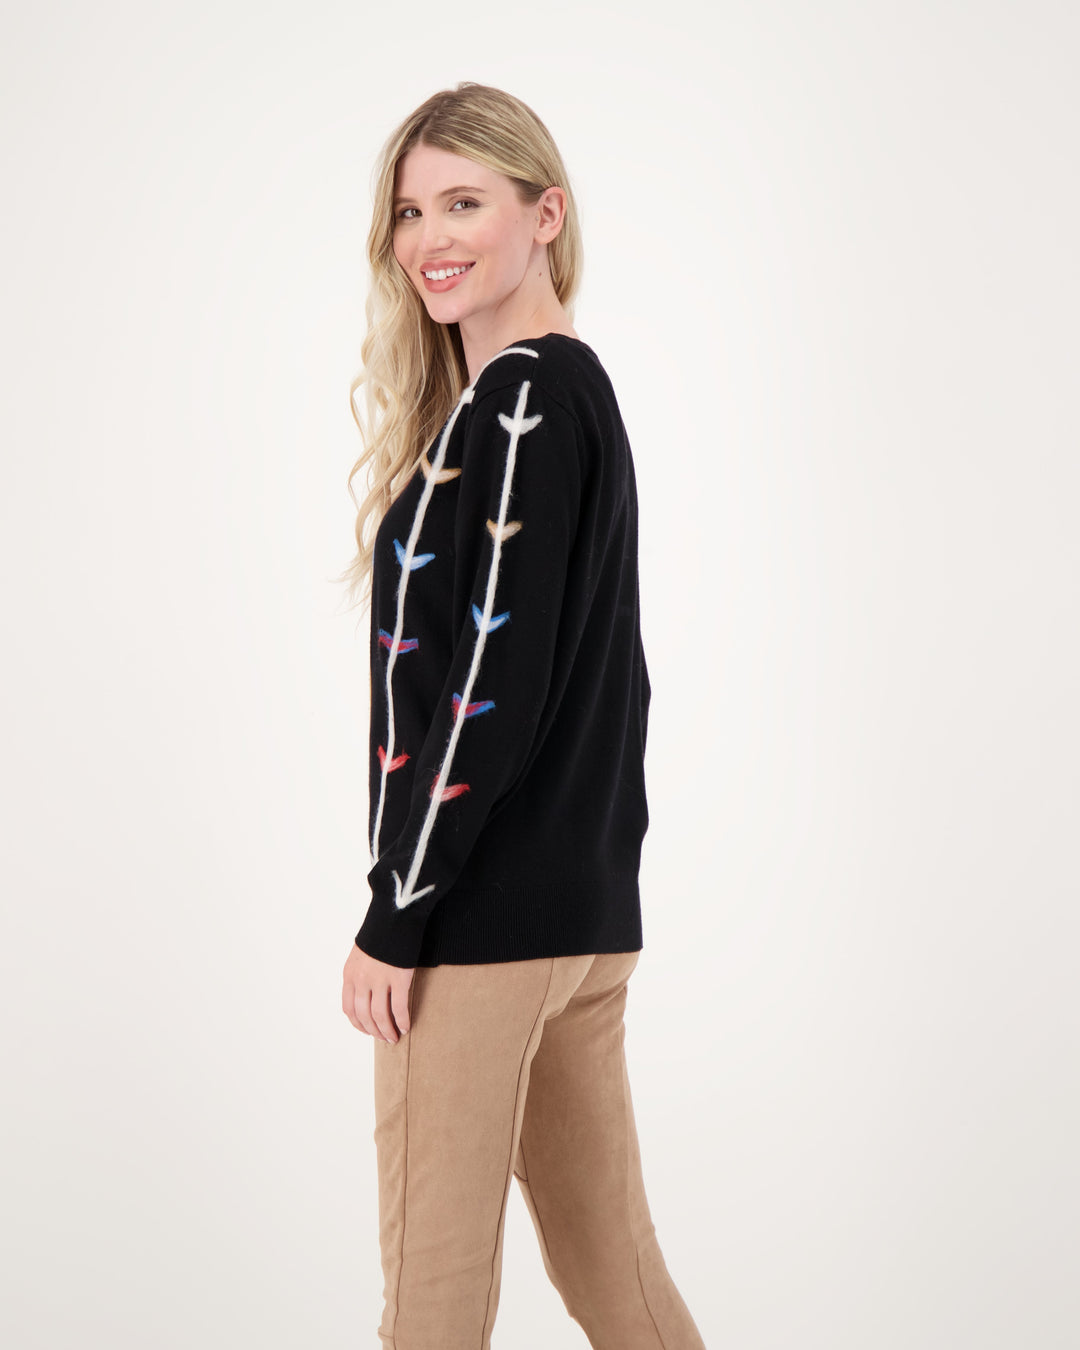 Rounded Hearts Sweater With Sleeve Detail